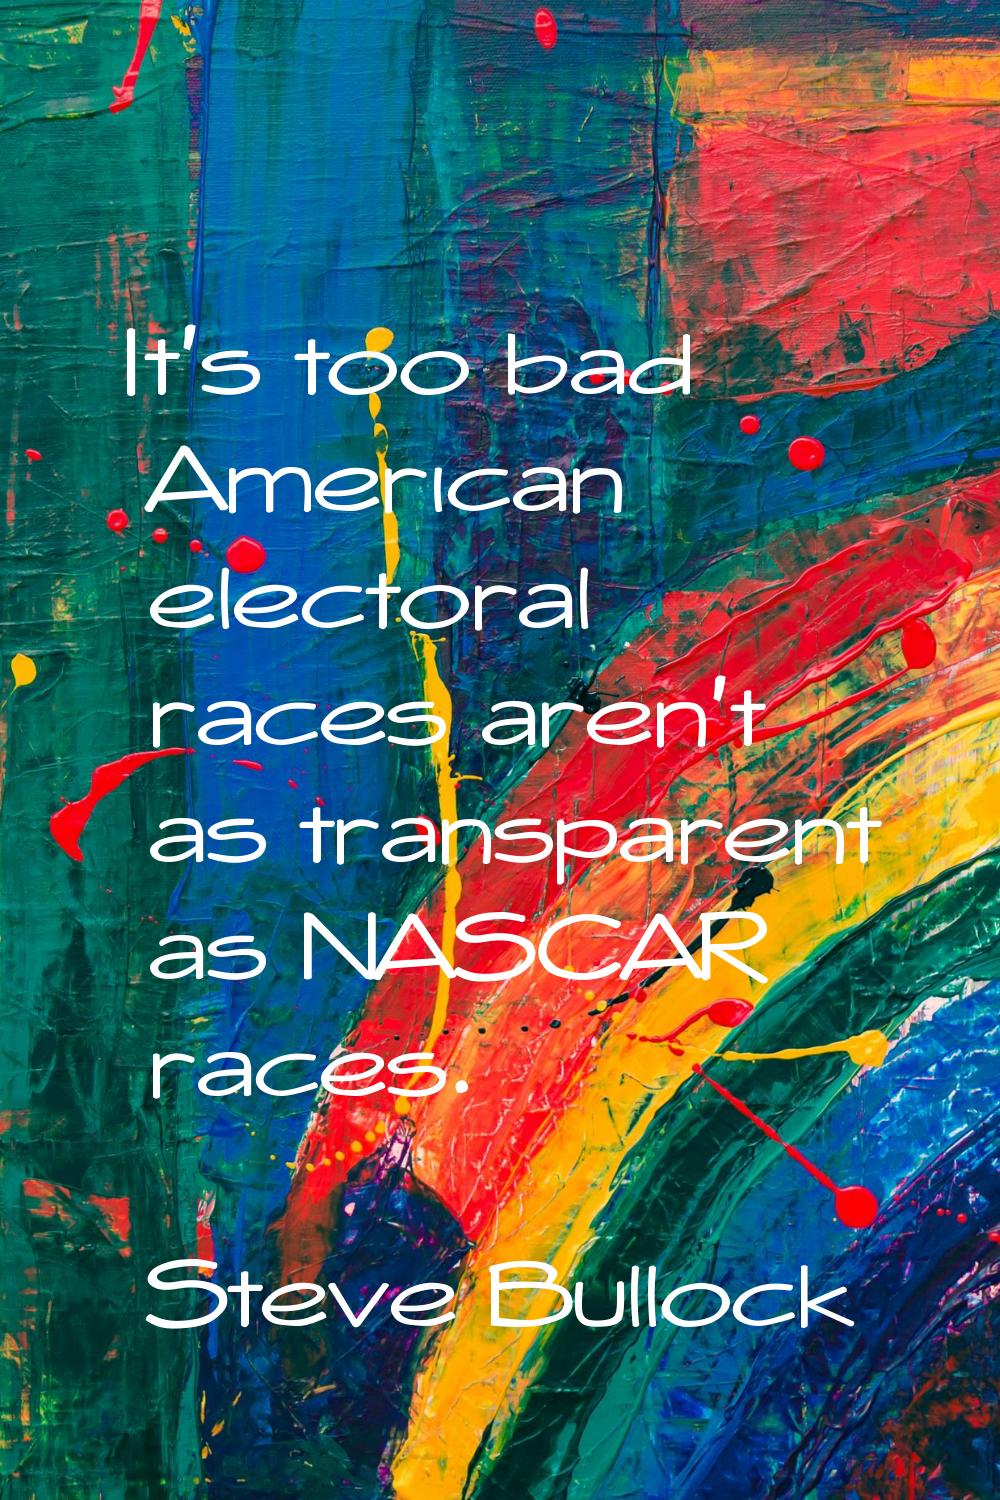 It's too bad American electoral races aren't as transparent as NASCAR races.